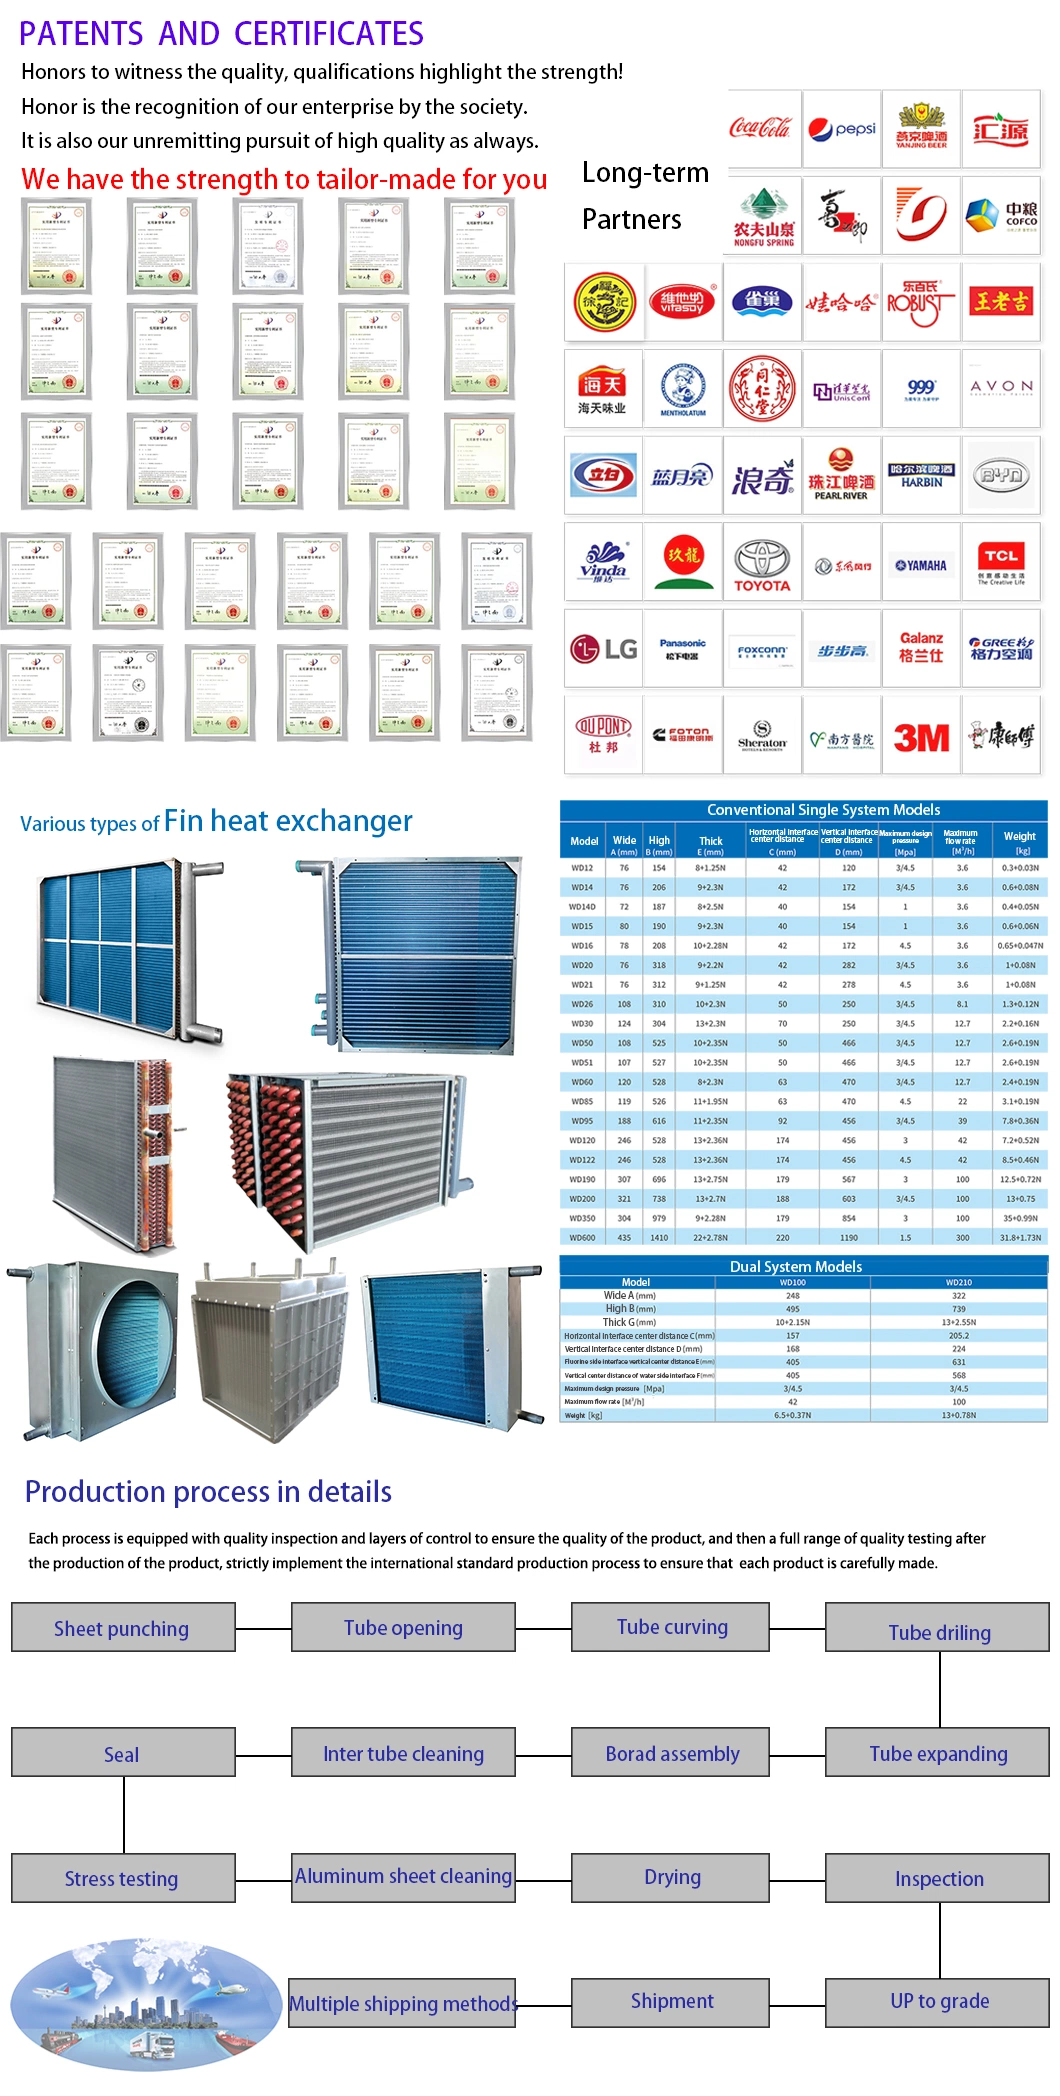 Refrigeration Cycle All Aluminum Heat Exchanger for a Dehumidification Application